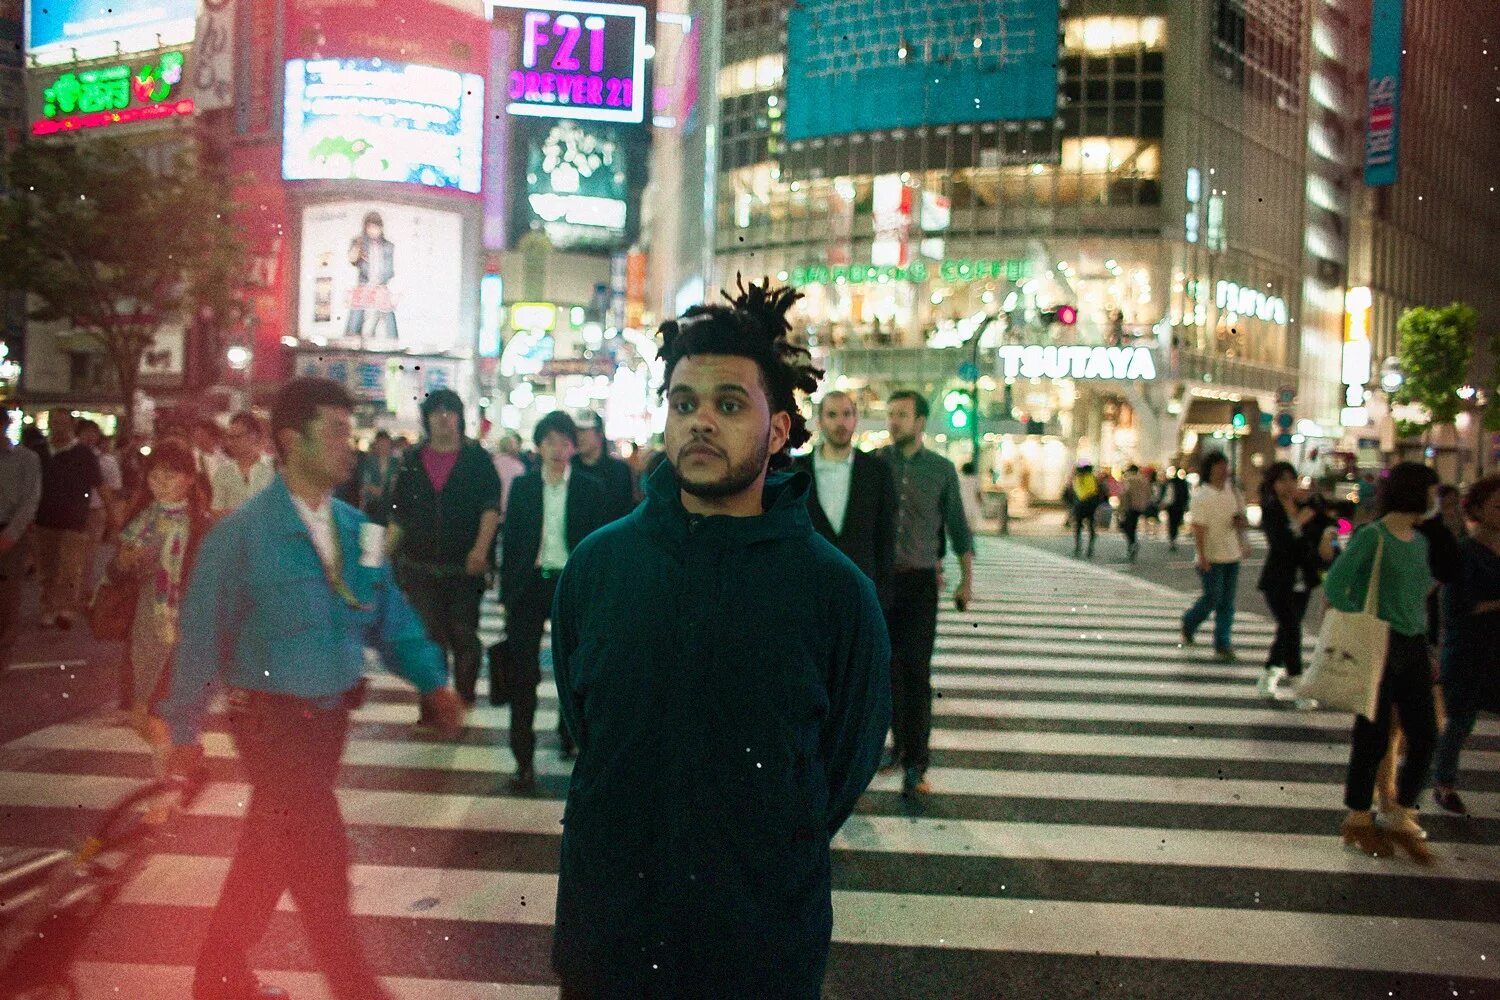 Again the weekend. The Weeknd. Weekend. The Weeknd Kiss Land. The Weeknd 2015.